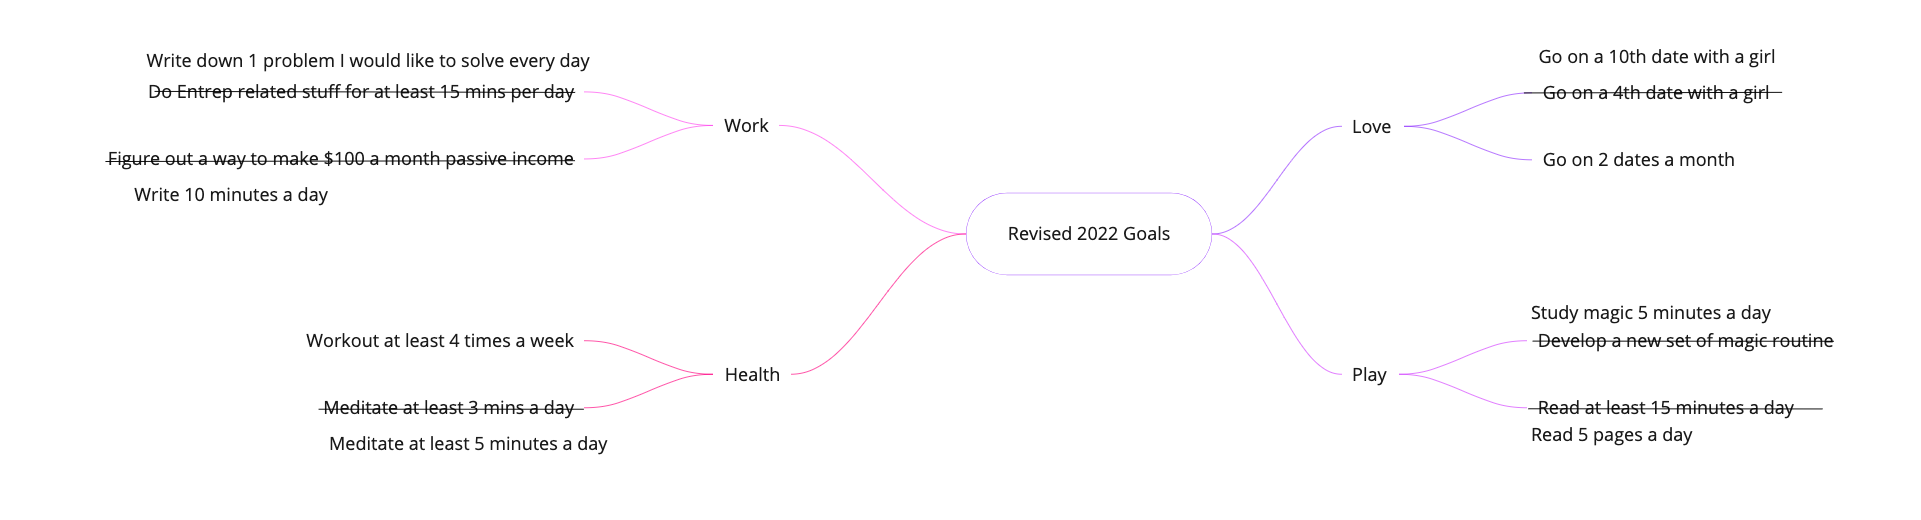 2022 Resolution Mid-year Review